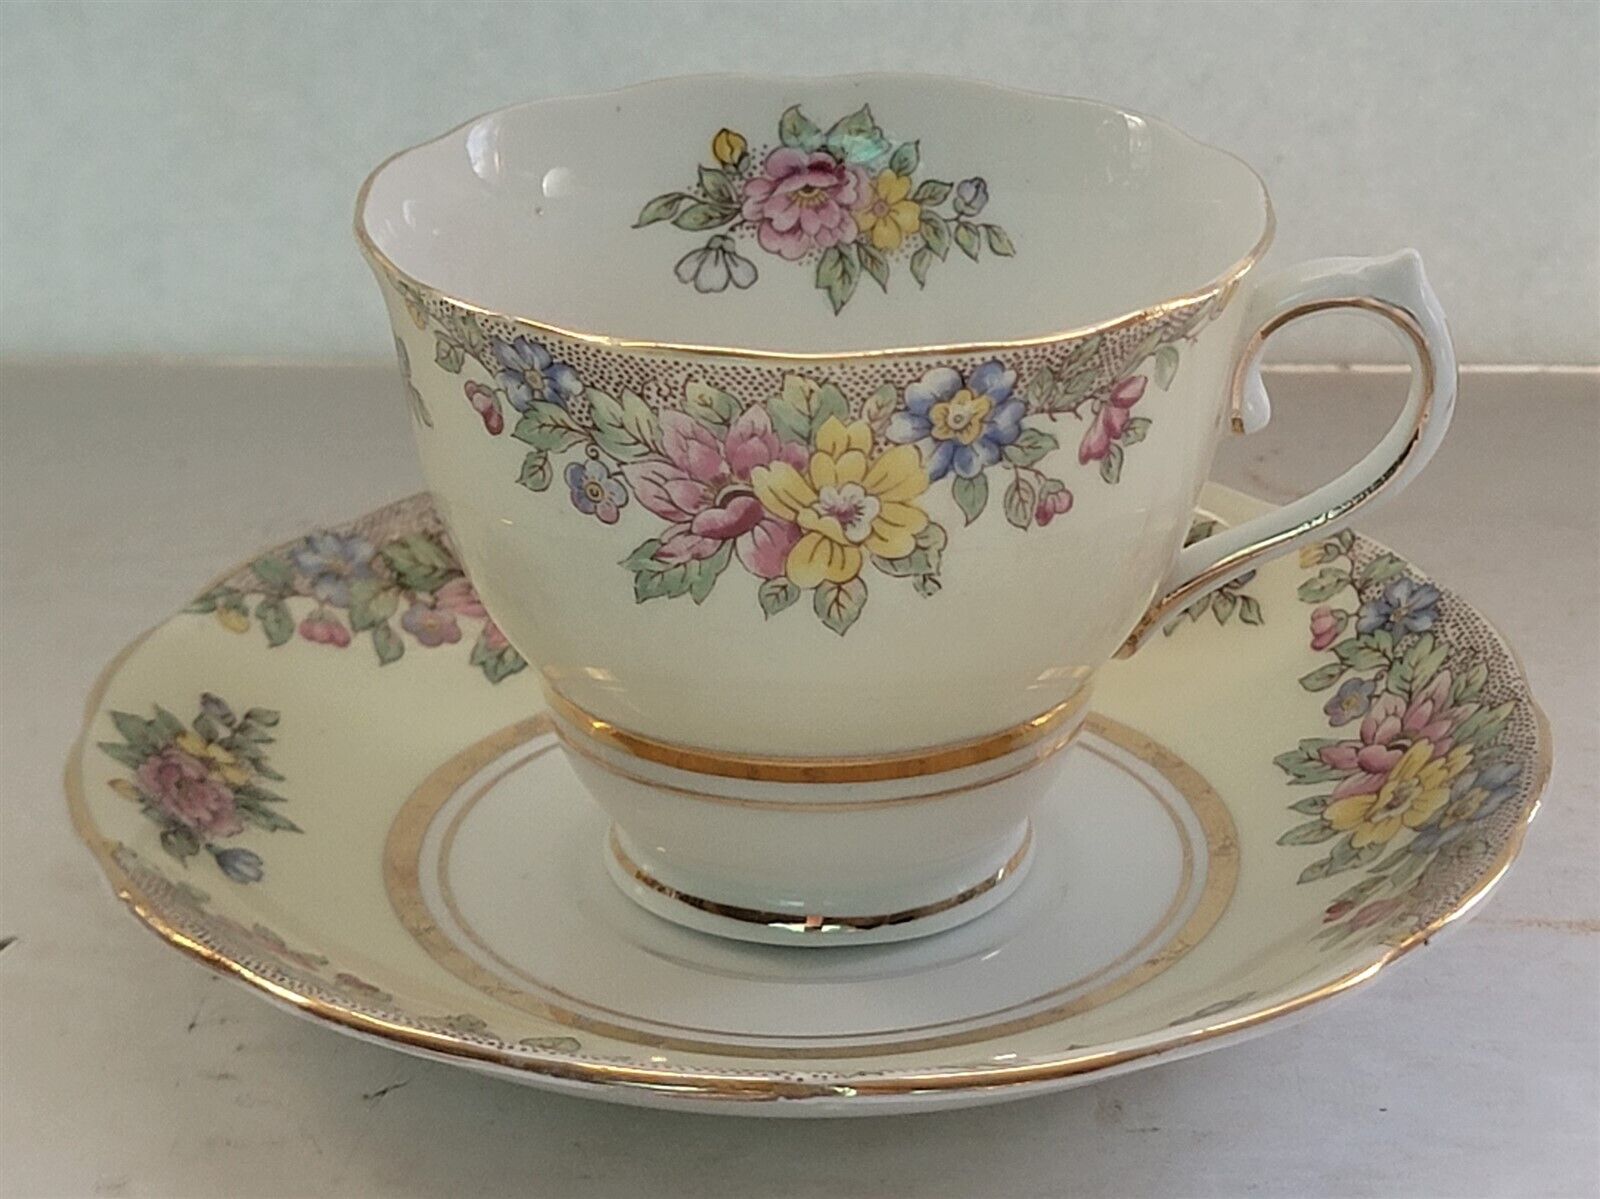 Vintage Colclough Fine Bone China Cup & Saucer Made in Longton England